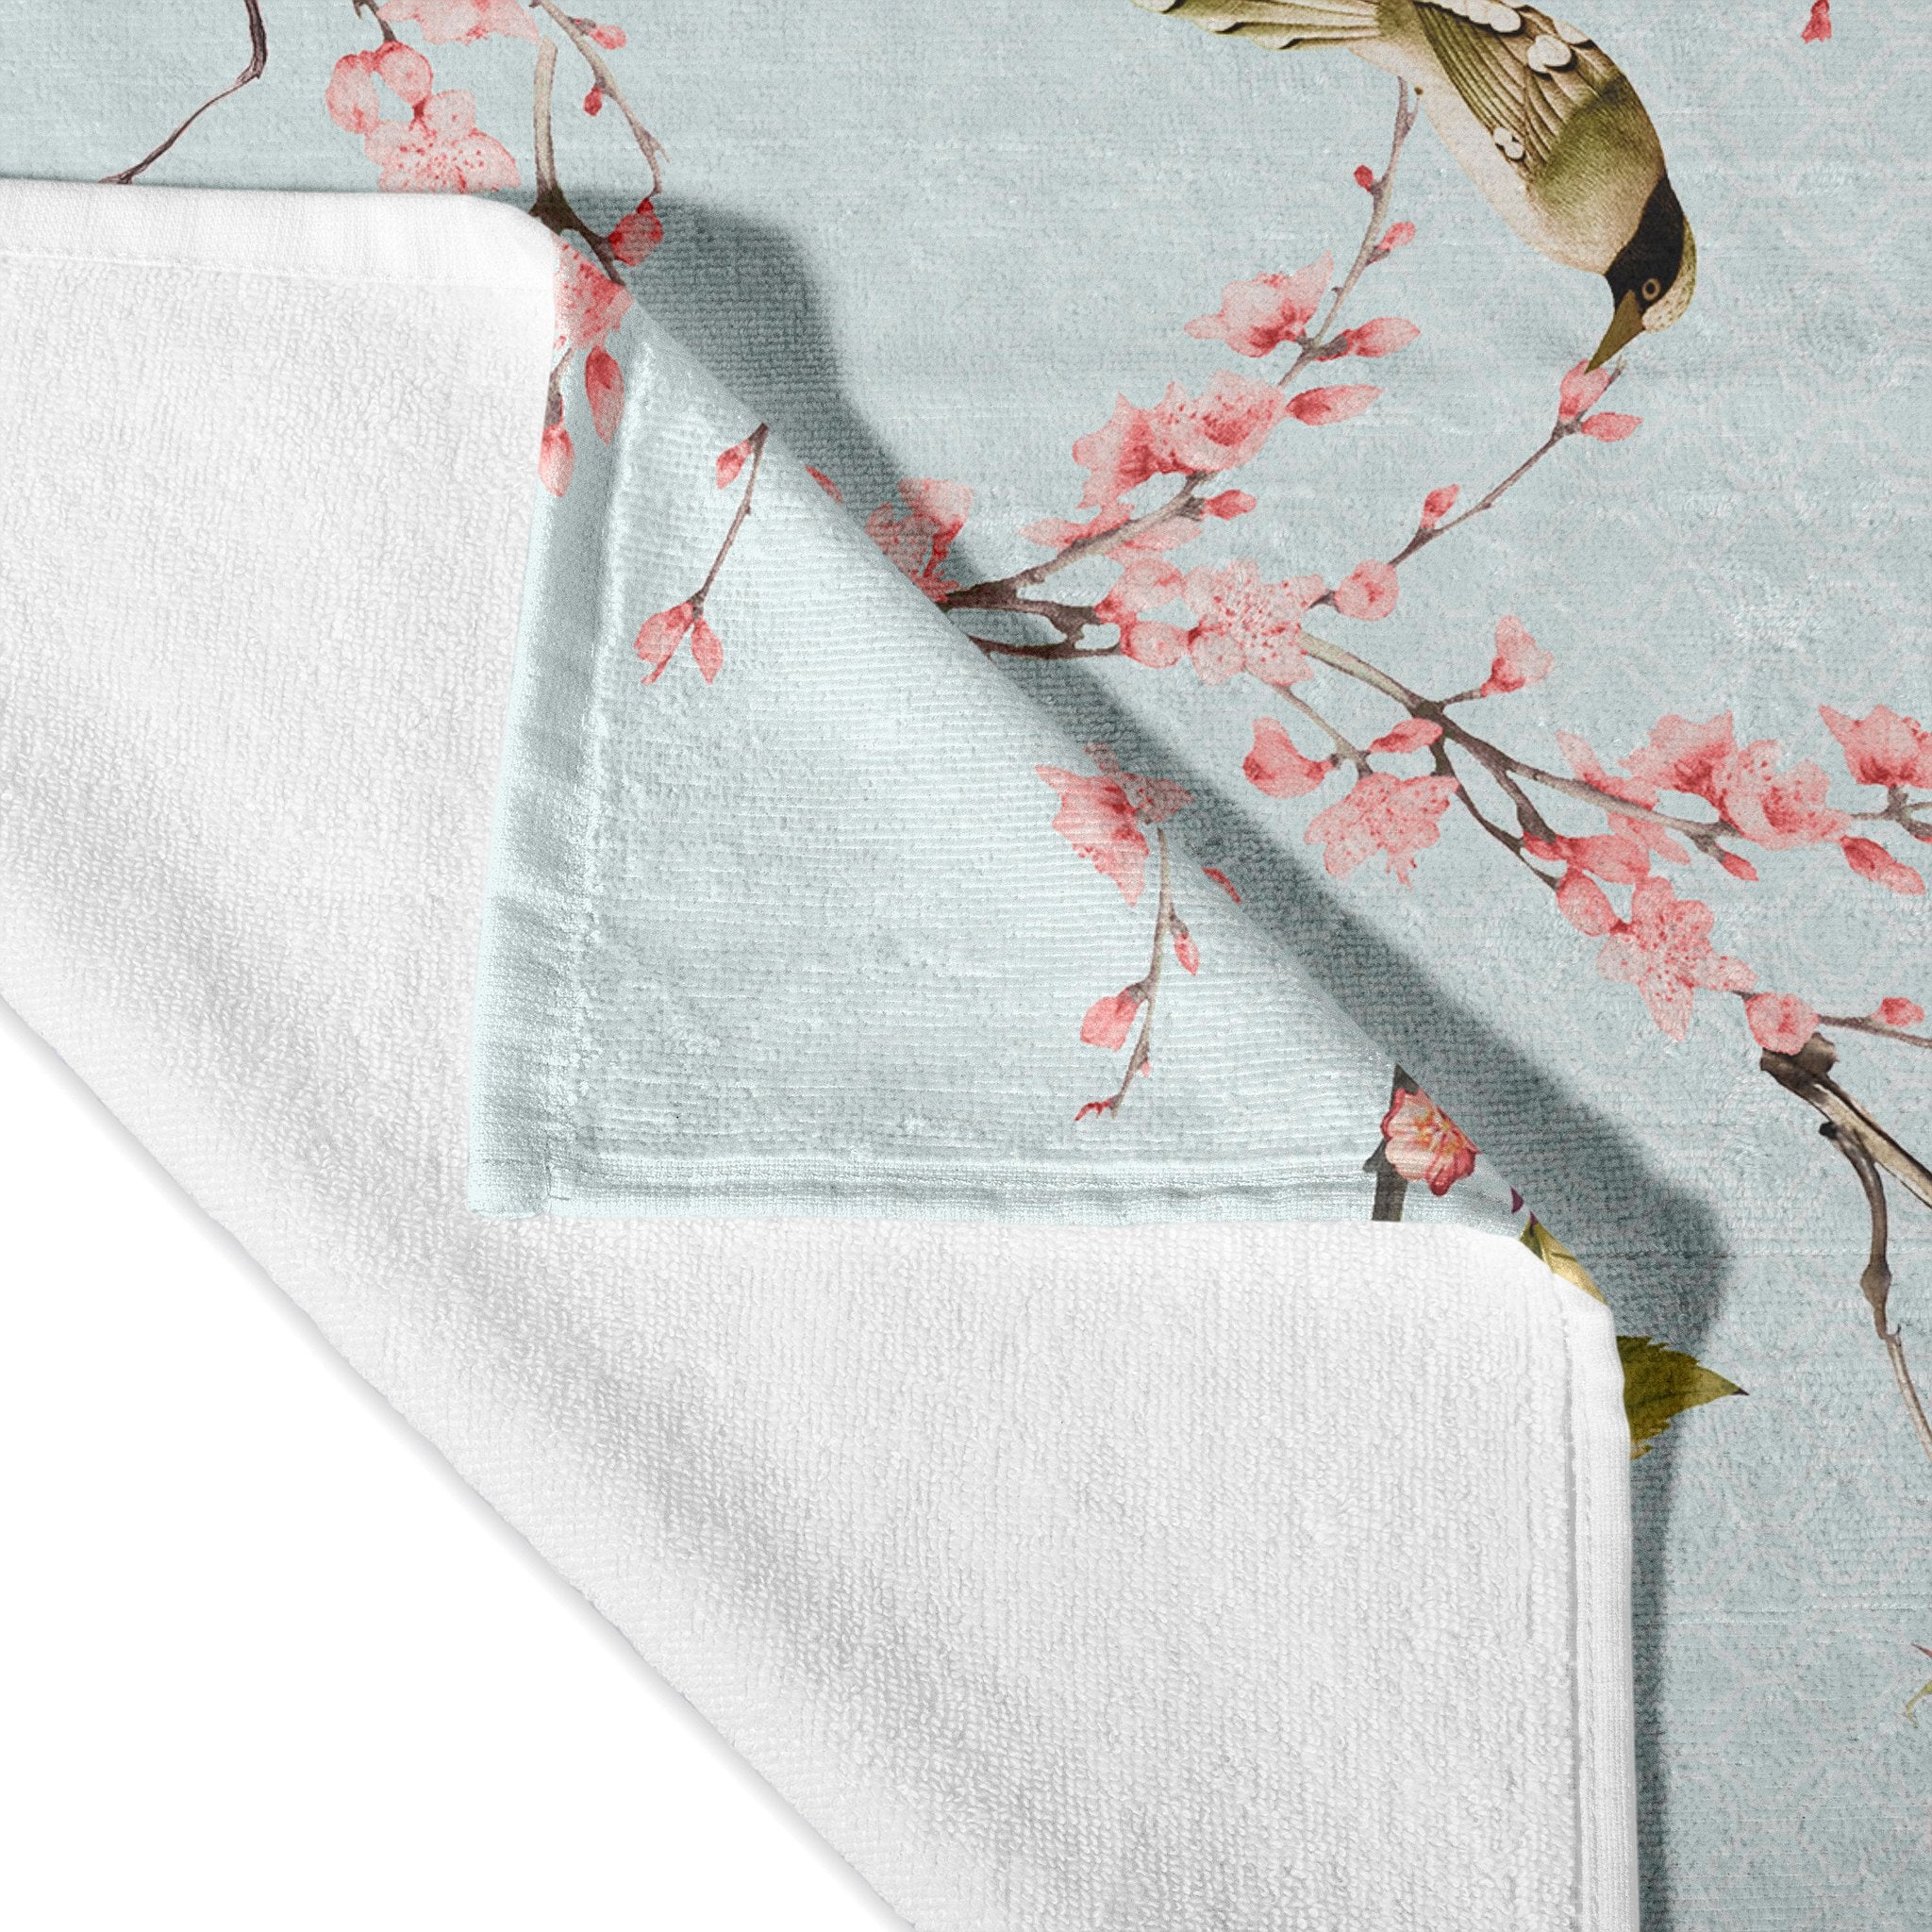 Happy Friday Towel Chinoiserie 70x150 cm Multicolor